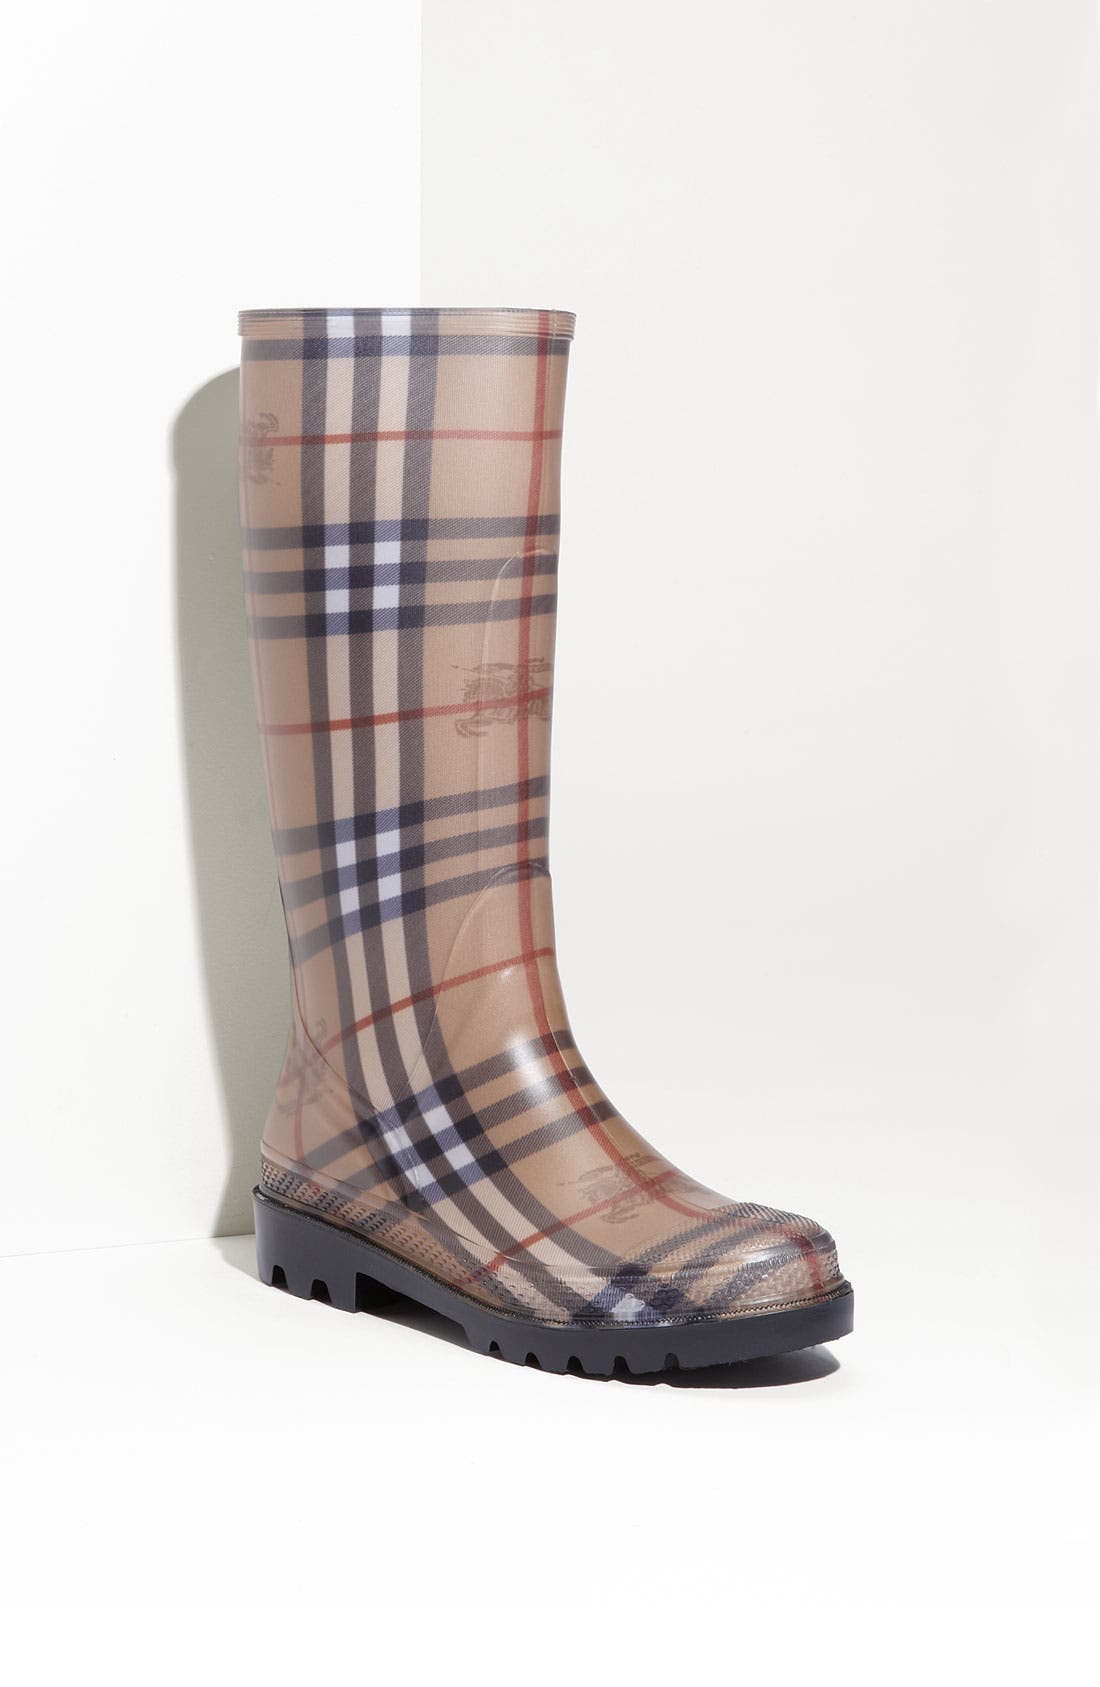 burberry boots sizing